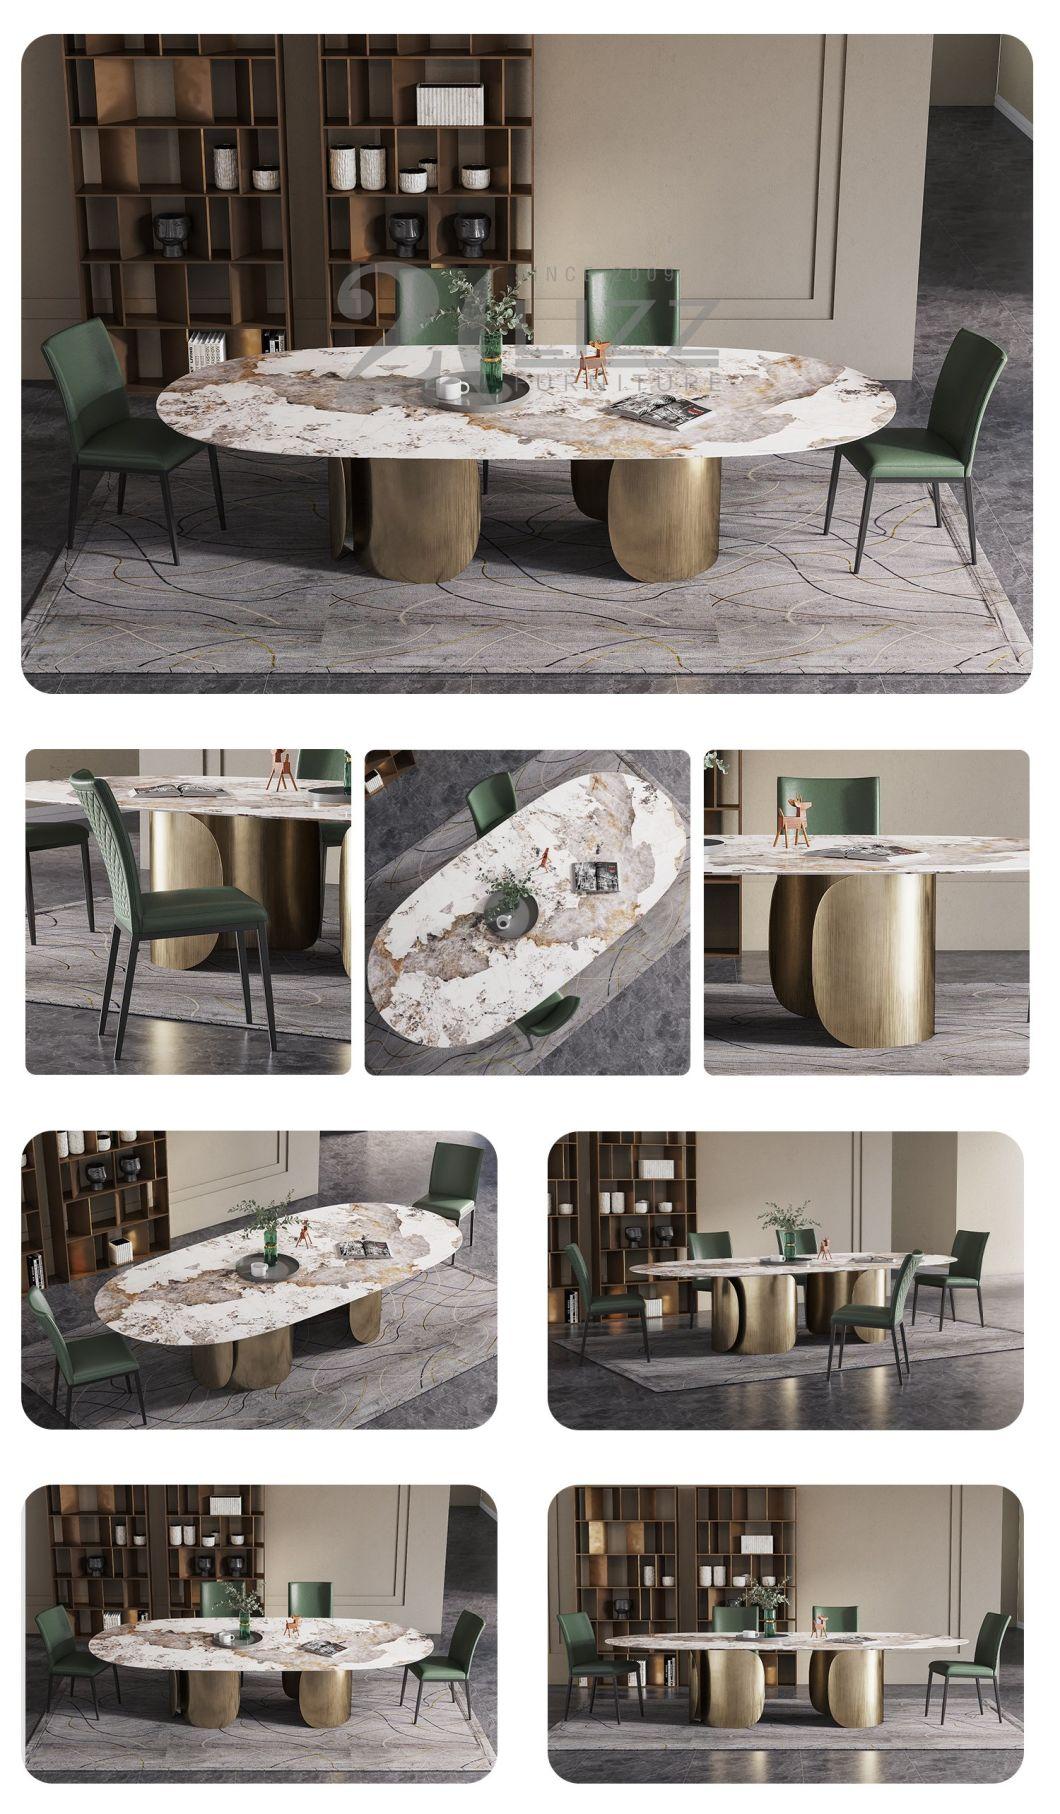 Italian High Quality Uphoslster Home Furniture Modern Circular Dining Room Table with Gold Metal Leg